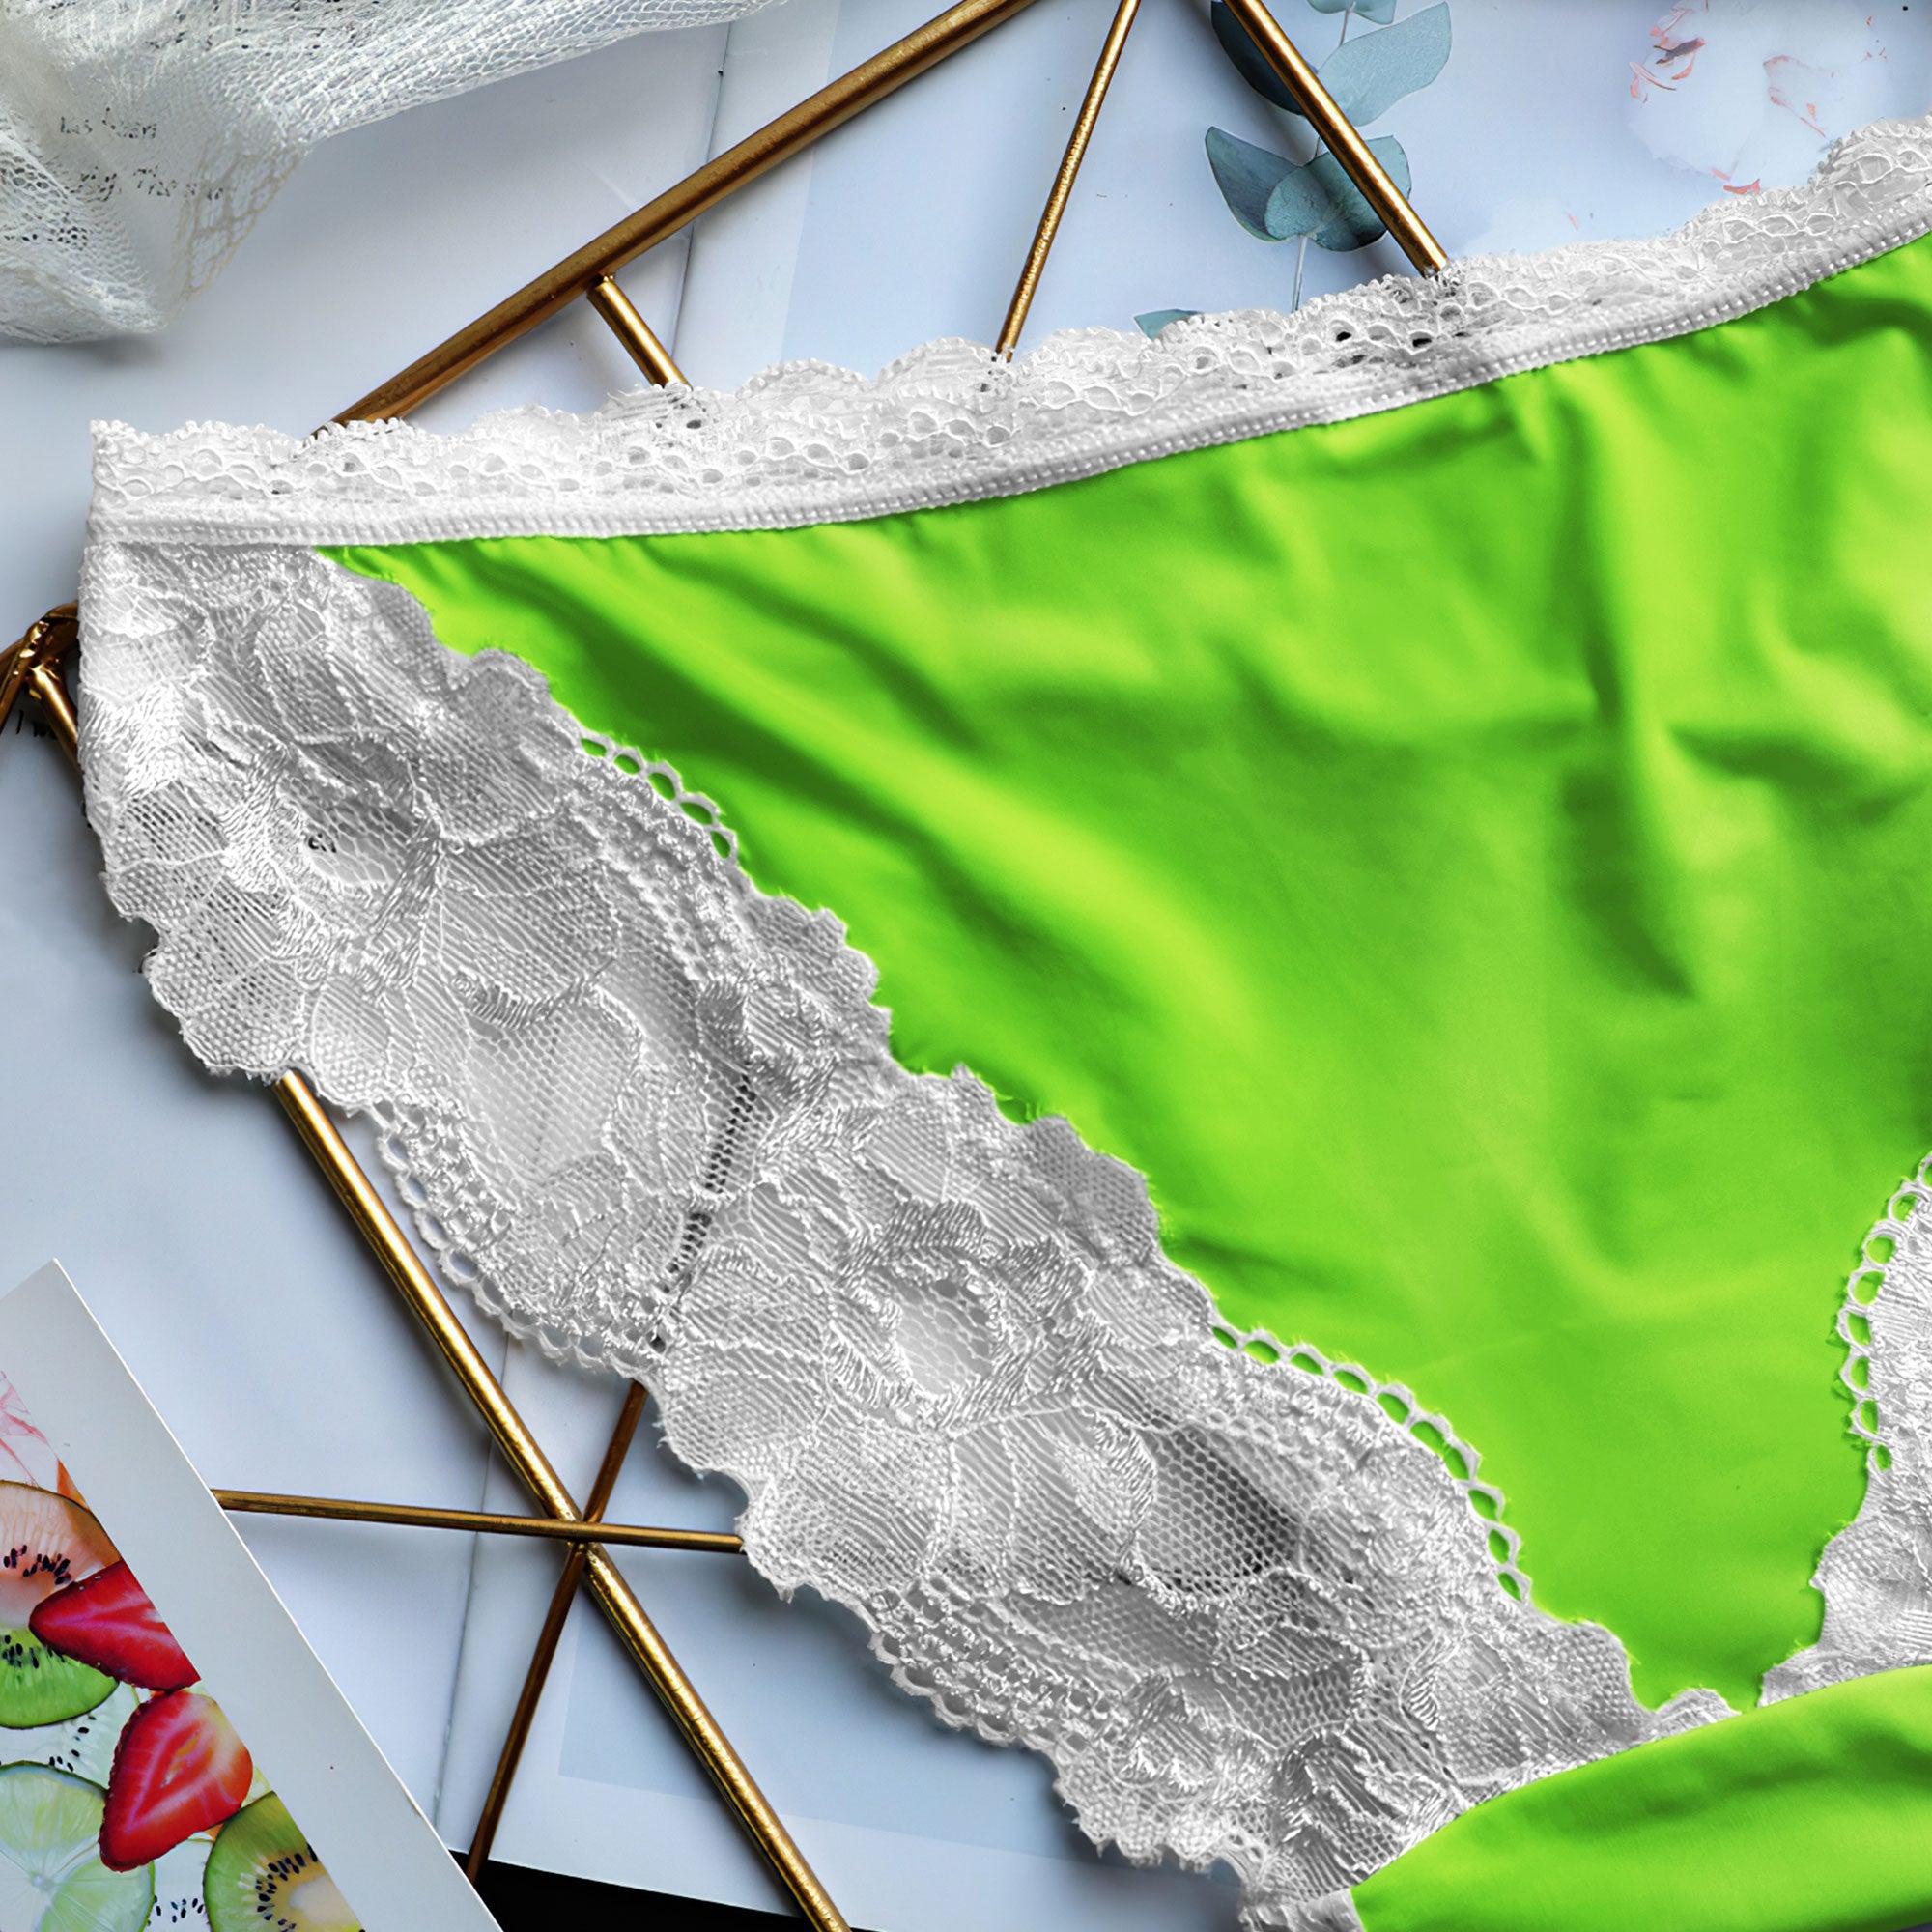 Sustainable lace lingerie: Because fashion should feel good.